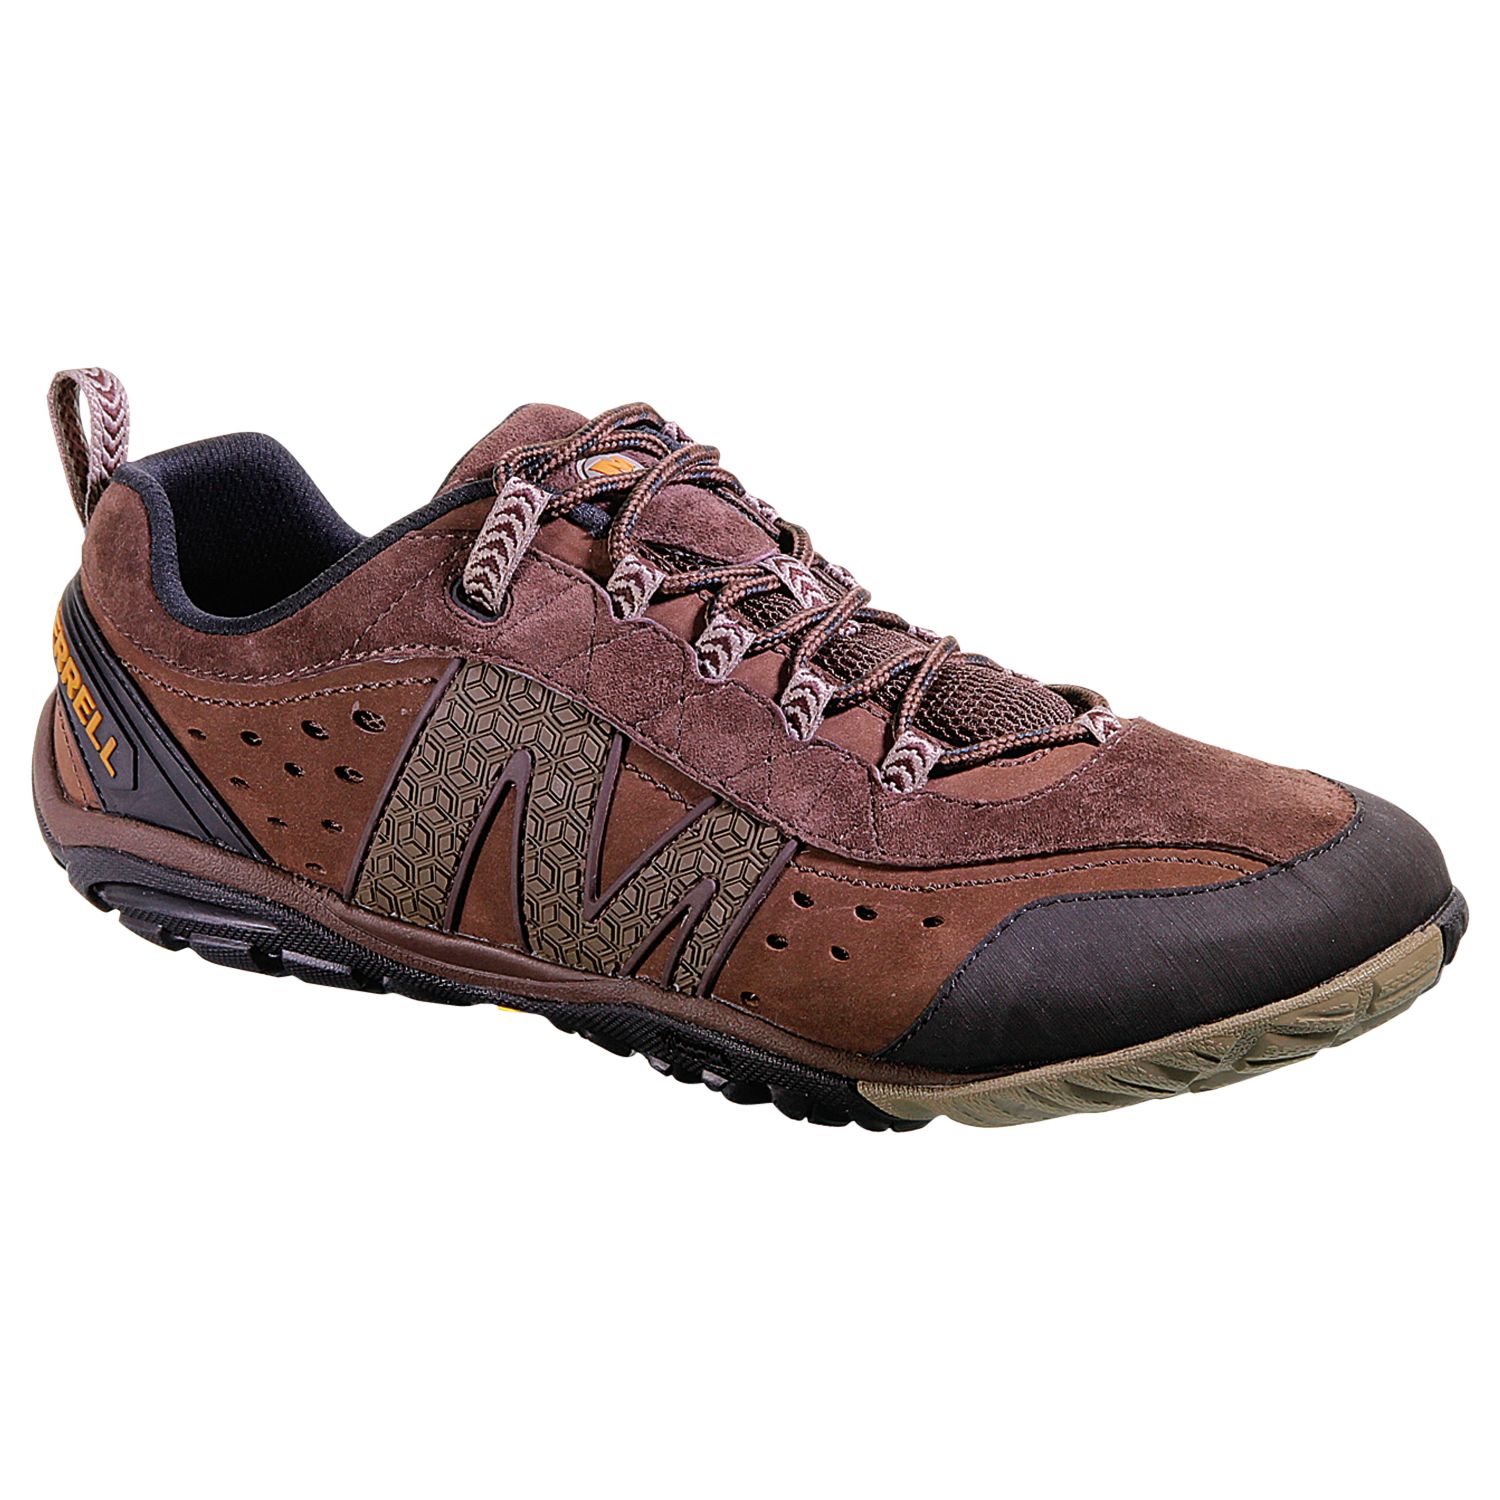 ... Merrell Venture Glove Leather Walking Shoes Online at johnlewis